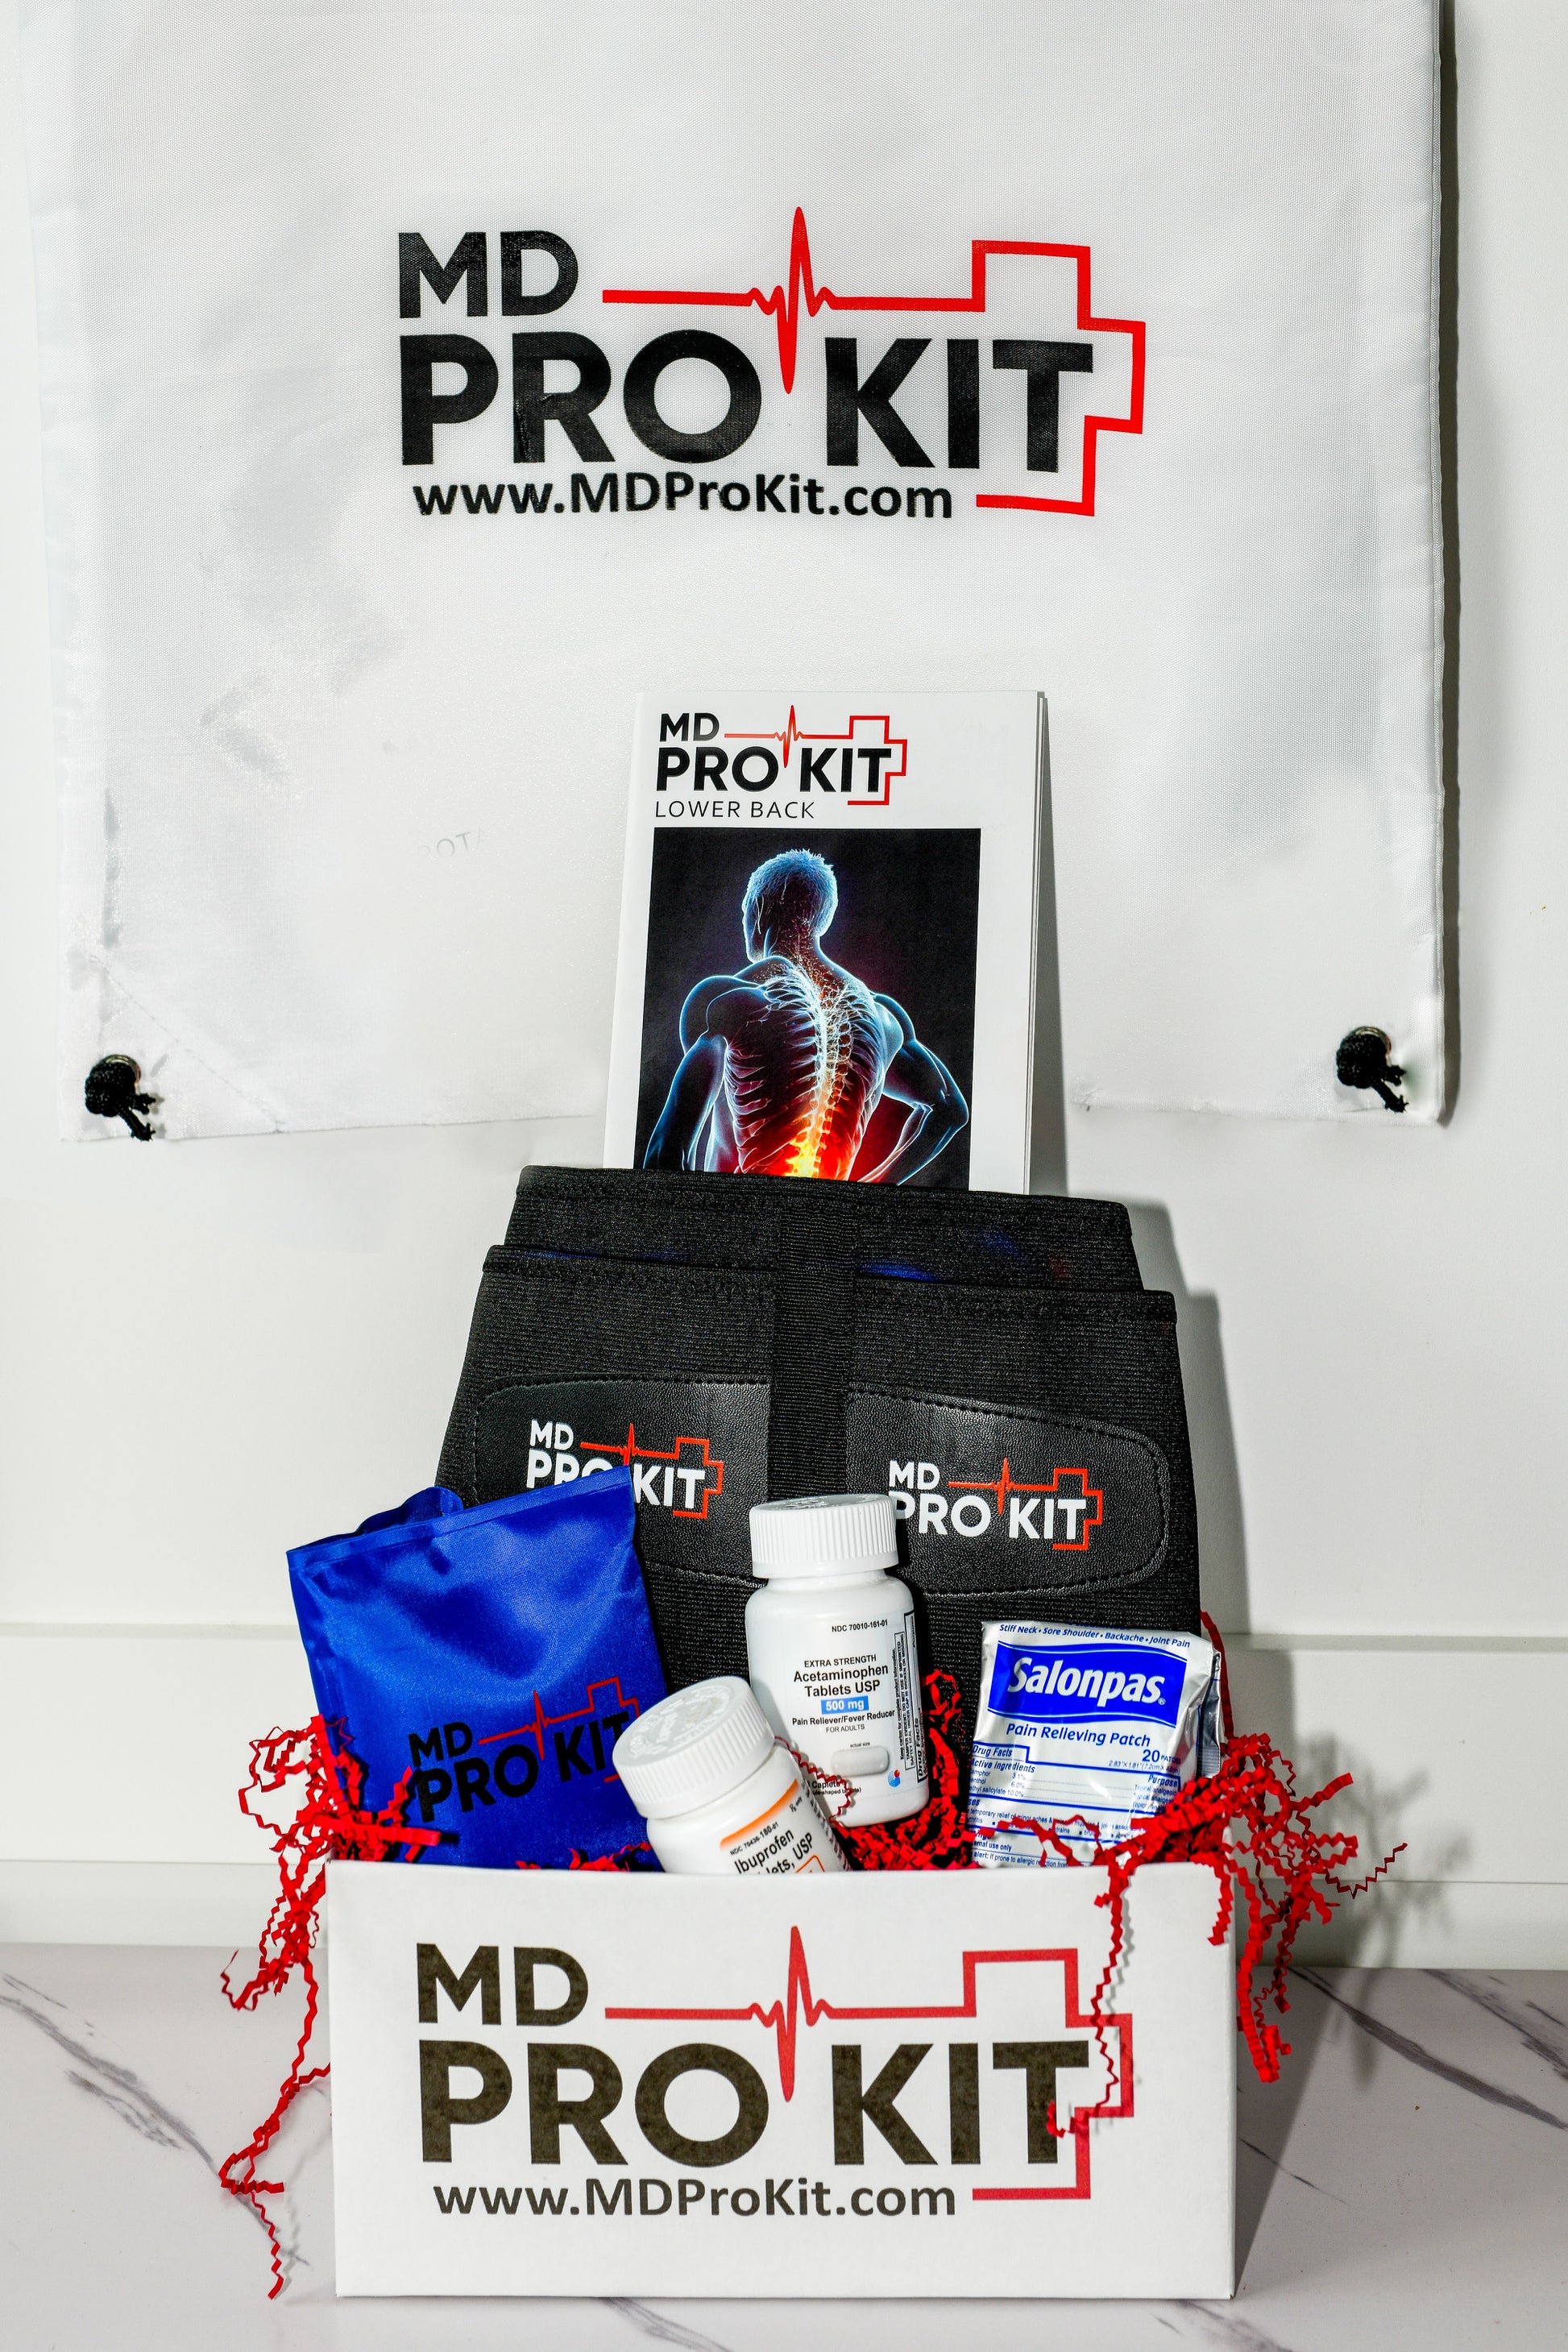 MDProKit for the Lower Back